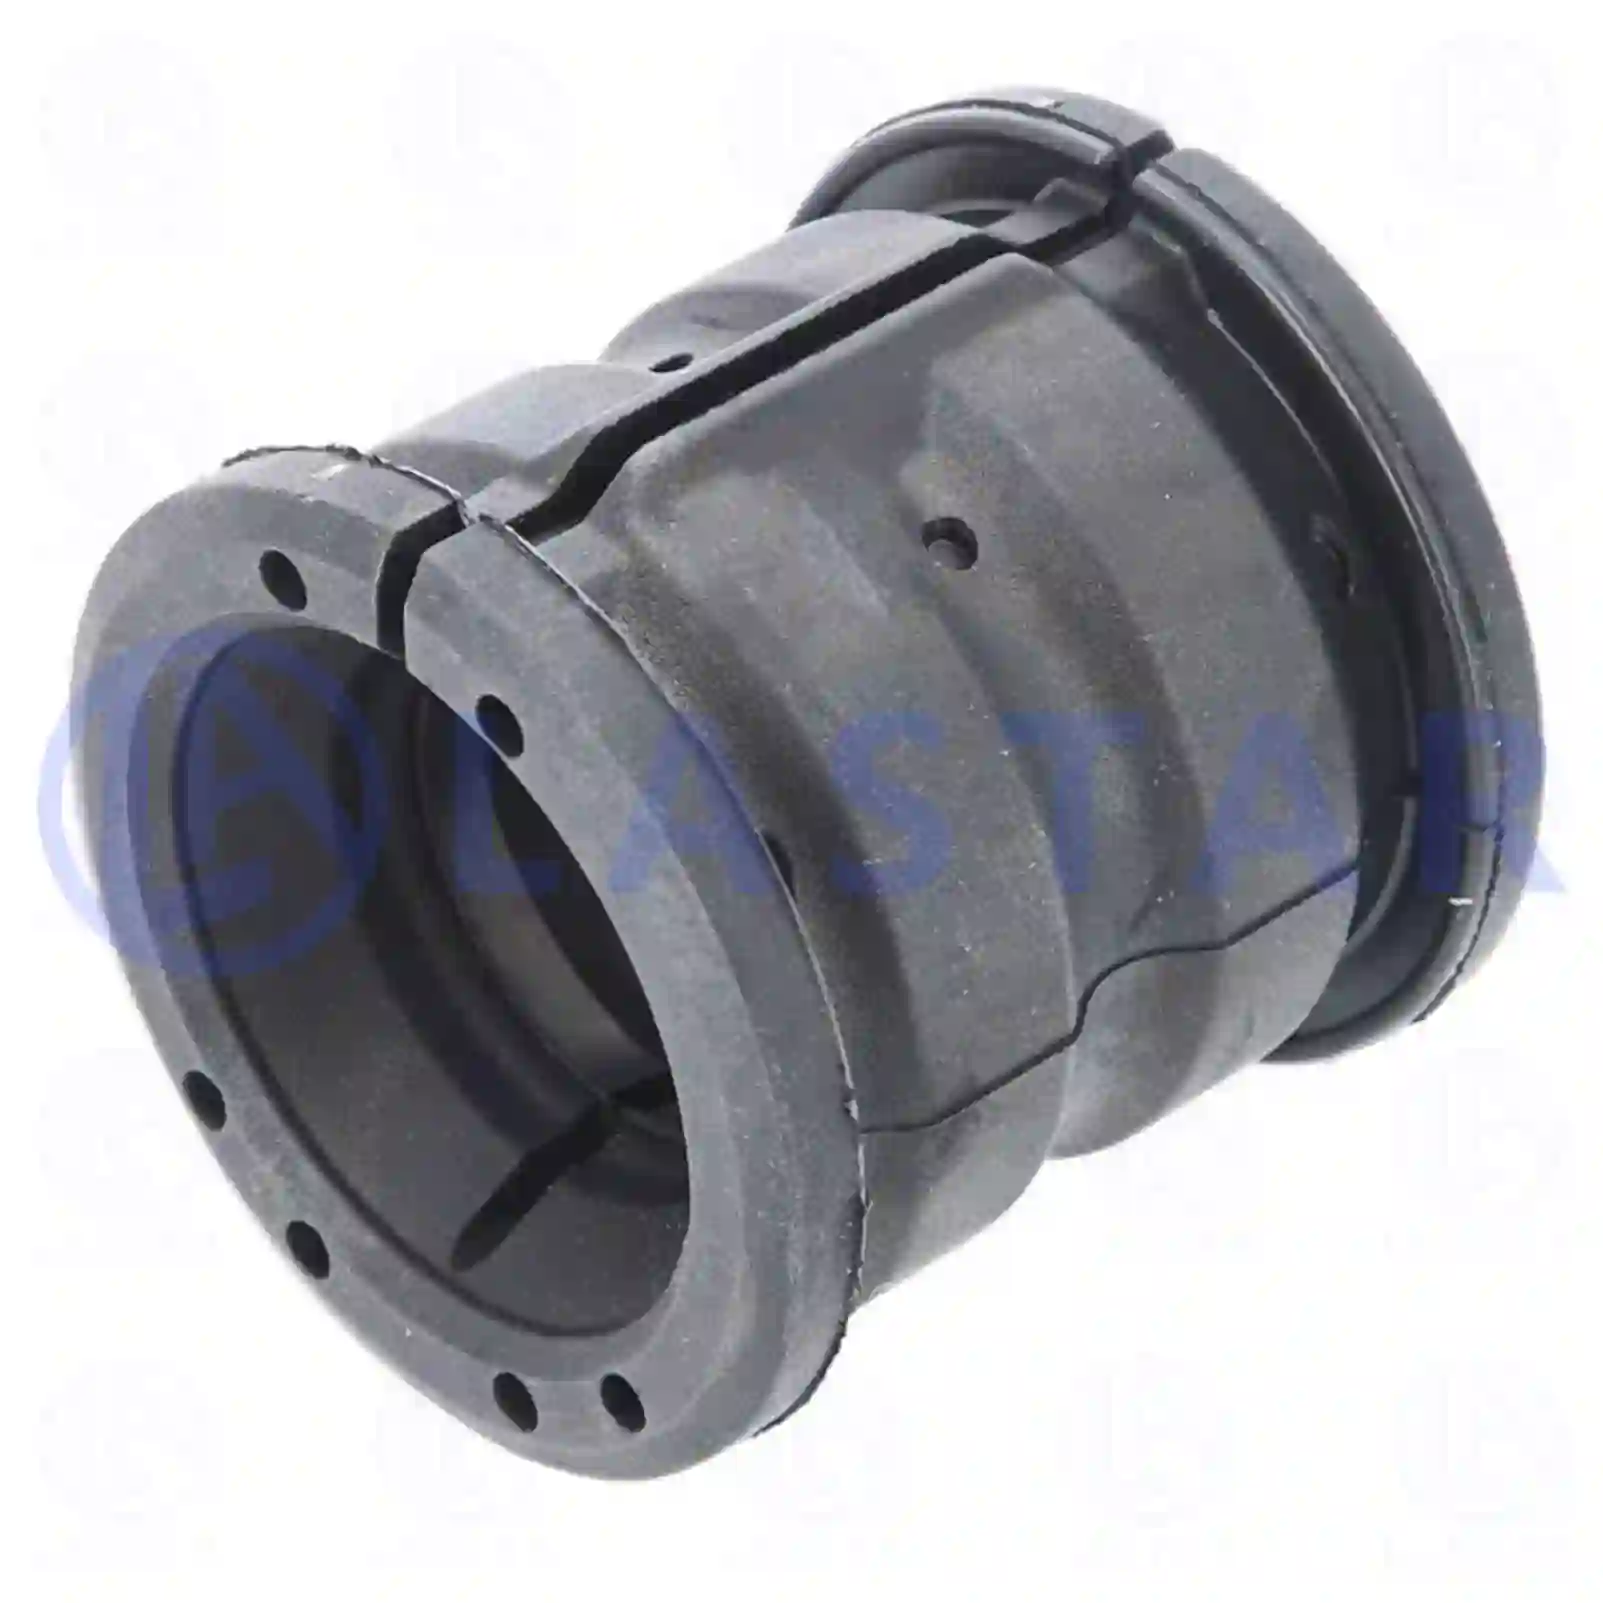 Bushing, stabilizer, 77728630, 1854591 ||  77728630 Lastar Spare Part | Truck Spare Parts, Auotomotive Spare Parts Bushing, stabilizer, 77728630, 1854591 ||  77728630 Lastar Spare Part | Truck Spare Parts, Auotomotive Spare Parts